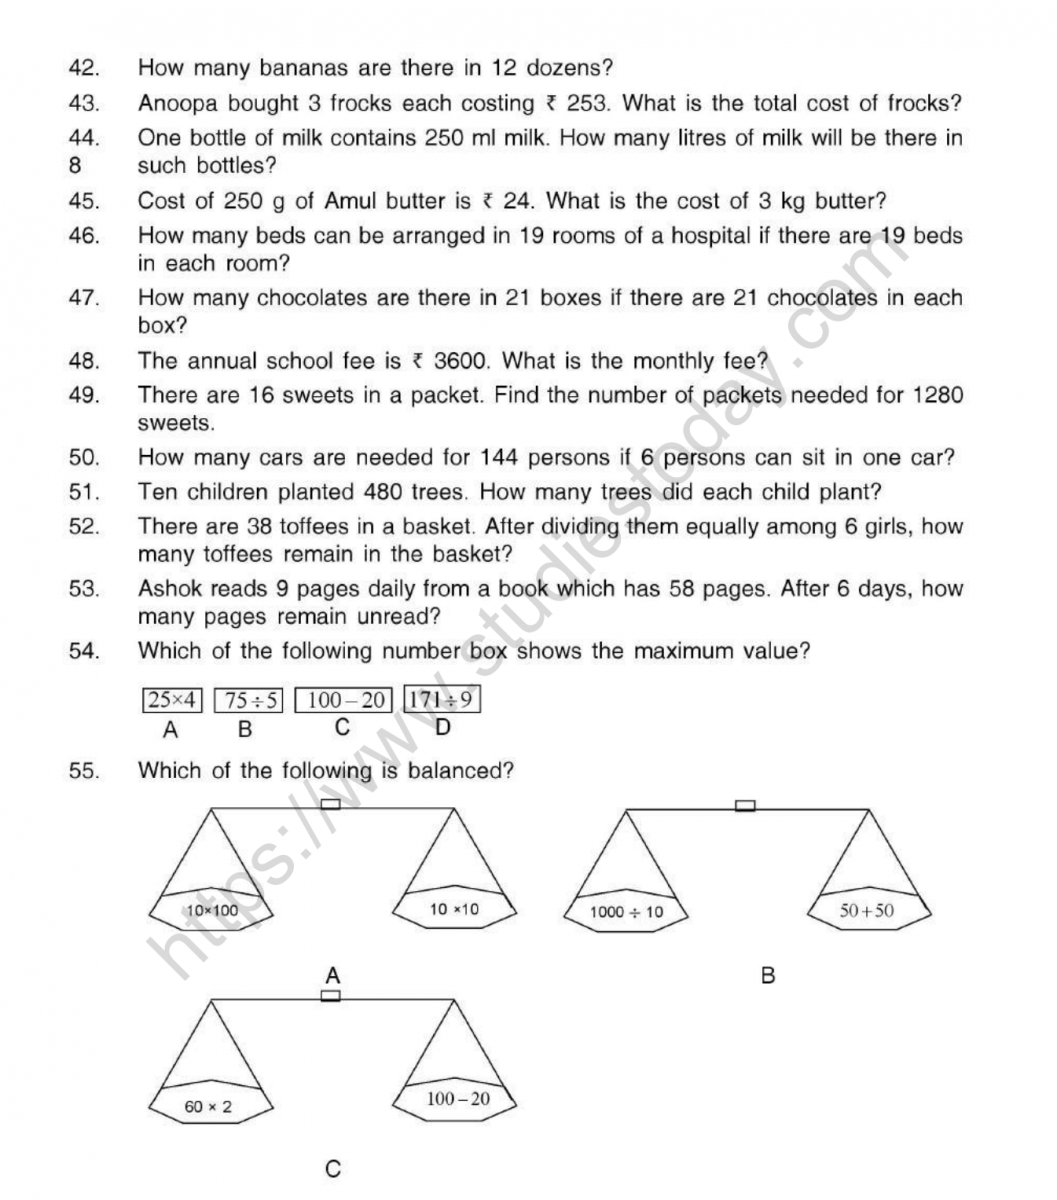 grade-5-math-worksheets-and-problems-large-numbers-math-worksheets-grade-5-math-worksheets